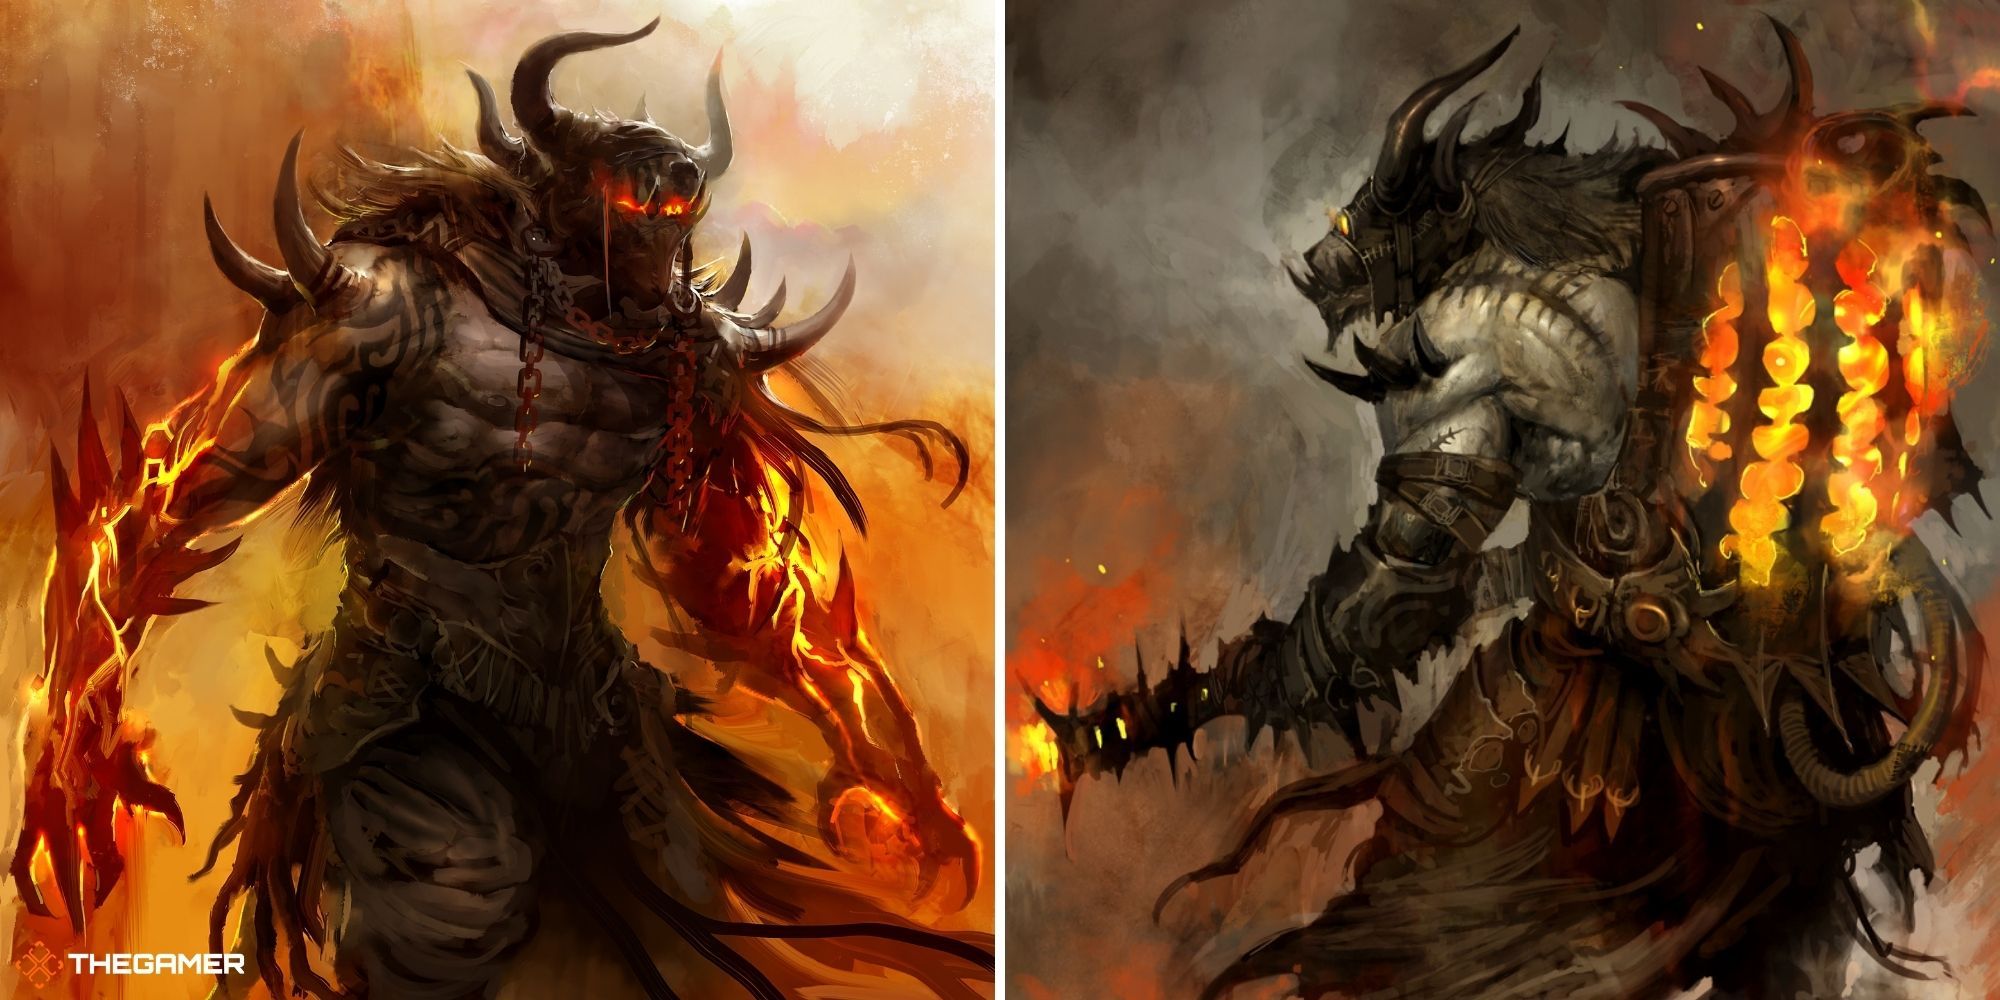 Guild Wars 2 - Official Art of Charr using flame magic